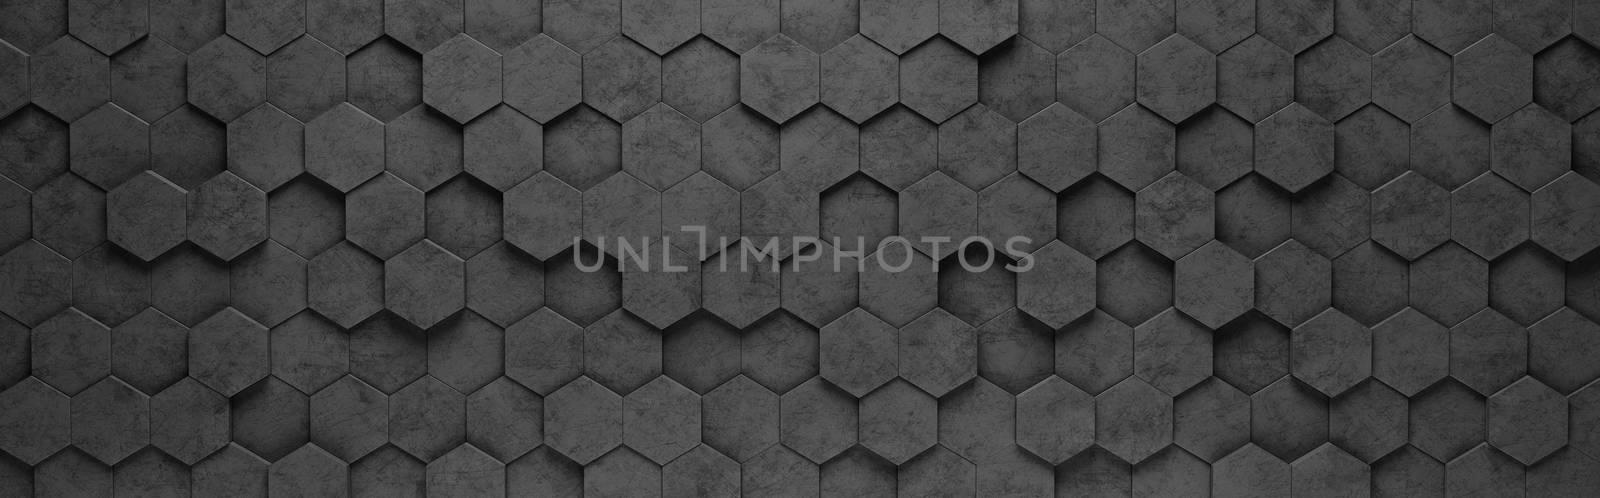 Hexagon Tiles 3D Pattern Background by make